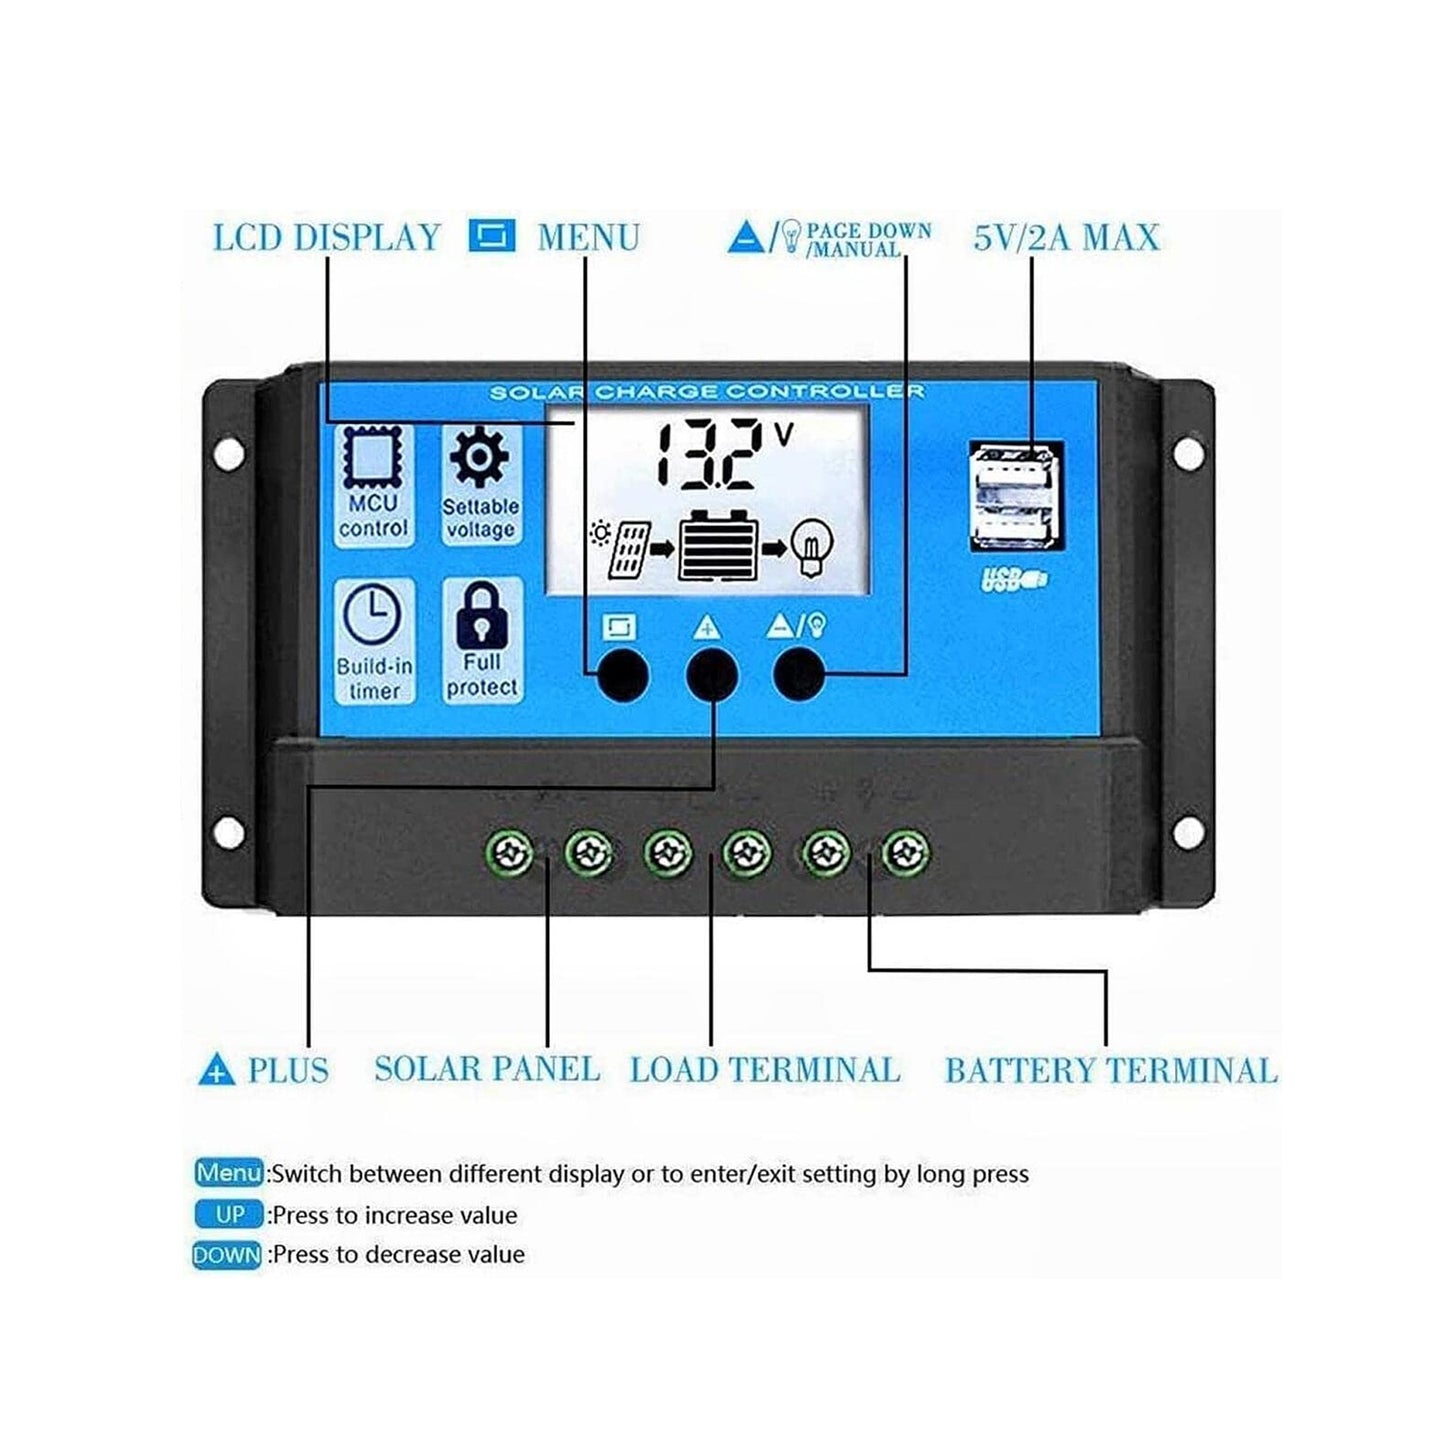 Solar Charge Controller, 10A Solar Panel Controller 12V 24V Adaptive PWM Auto Parameter Adjustable LCD Display Solar Panel Battery Regulator with Dual USB Port - RS5202 - REES52